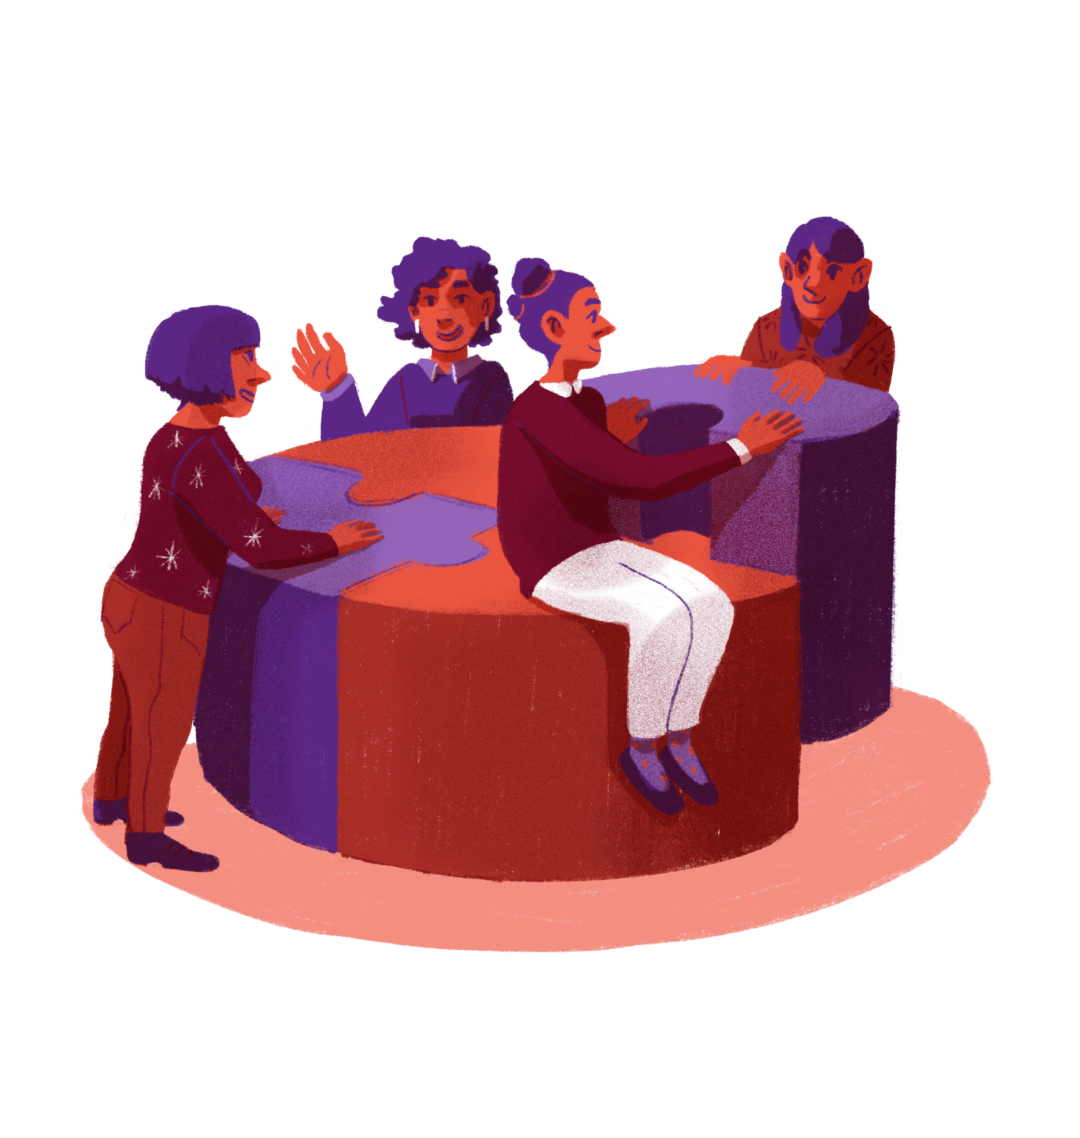 illustration in red and purple of women and nonbinary persons engaged in conversation